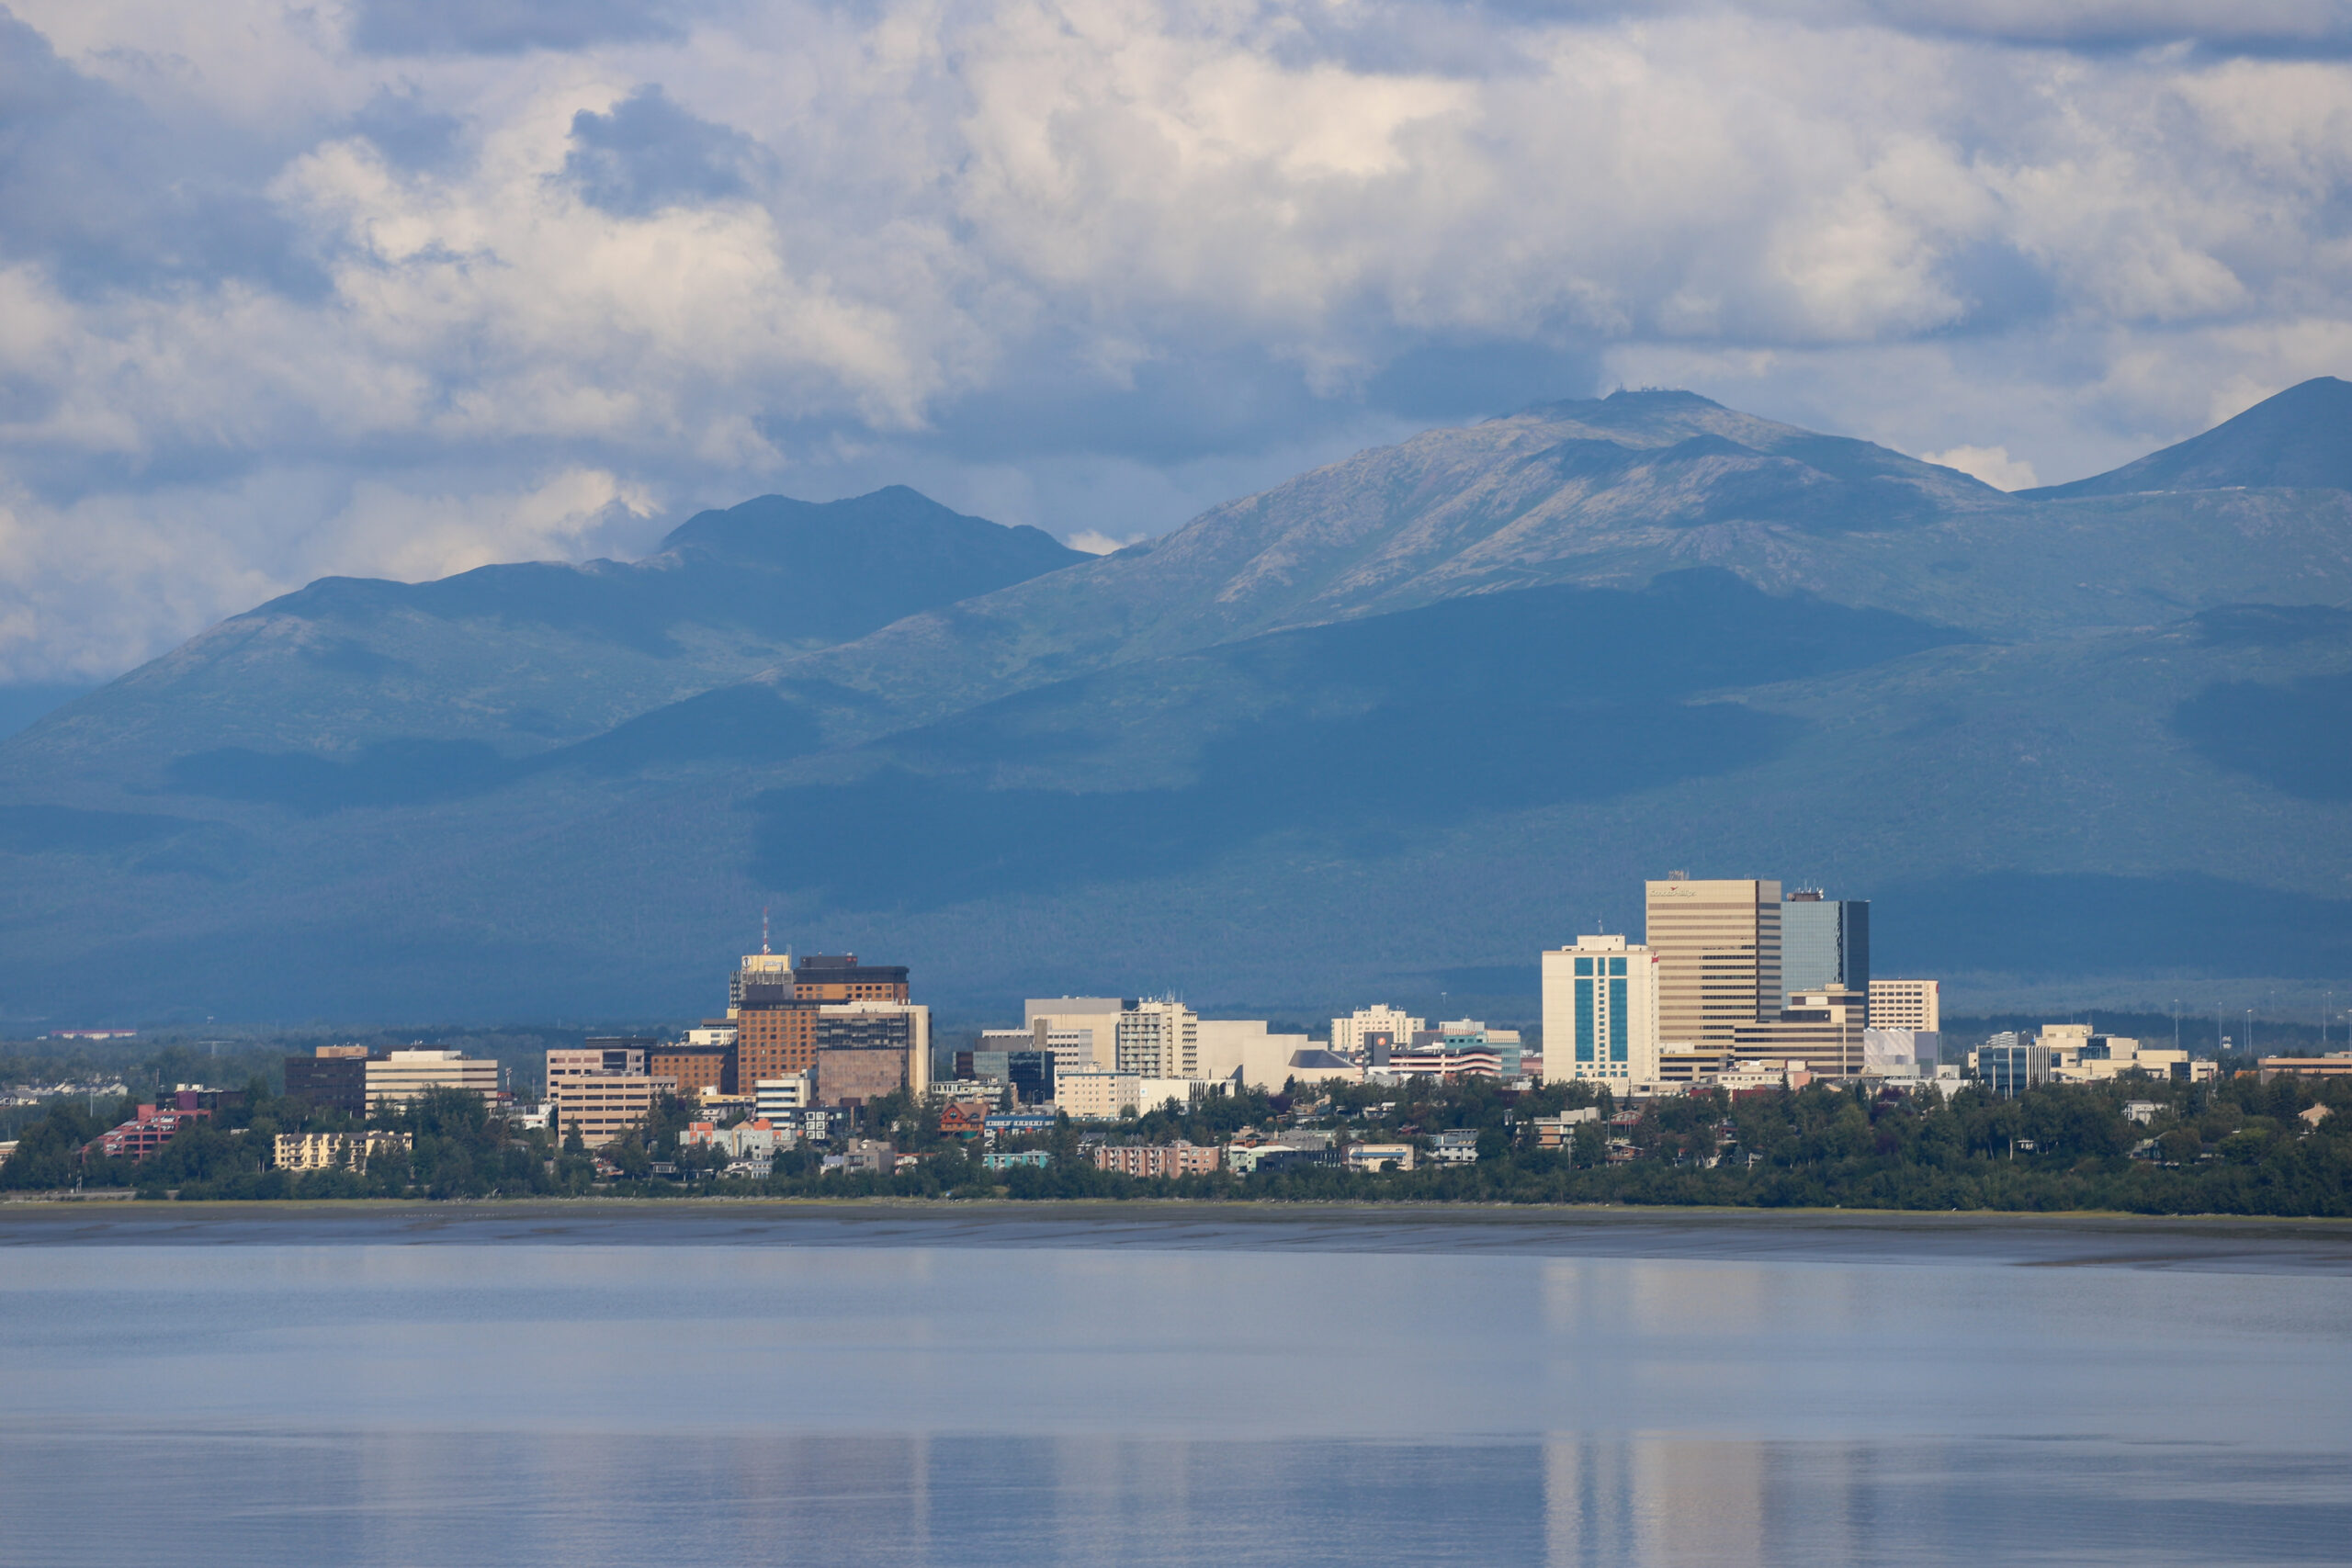 Downtown Anchorage, with water in the foreground and mountains behind.